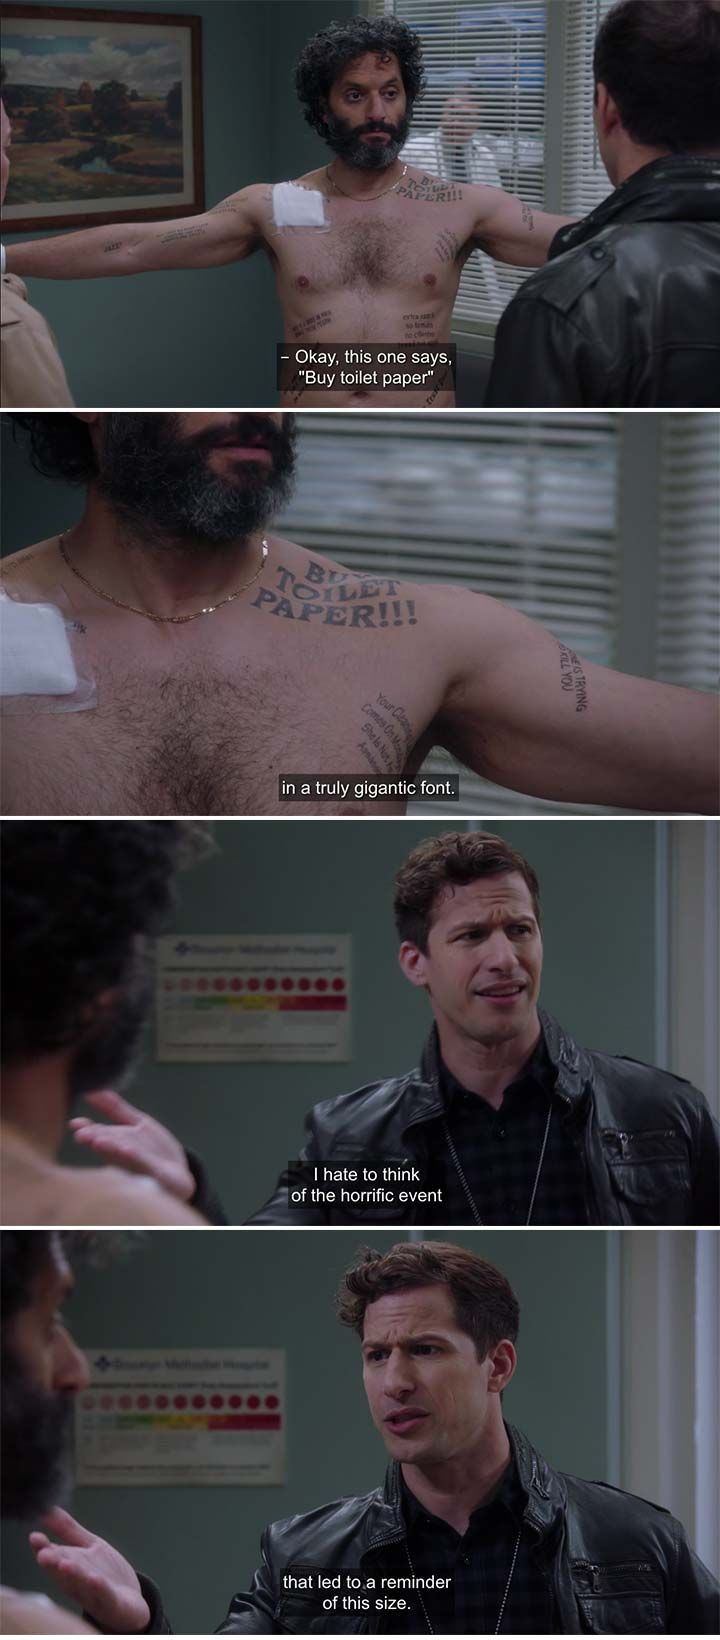 Brooklyn 99 warned us about COVID-19